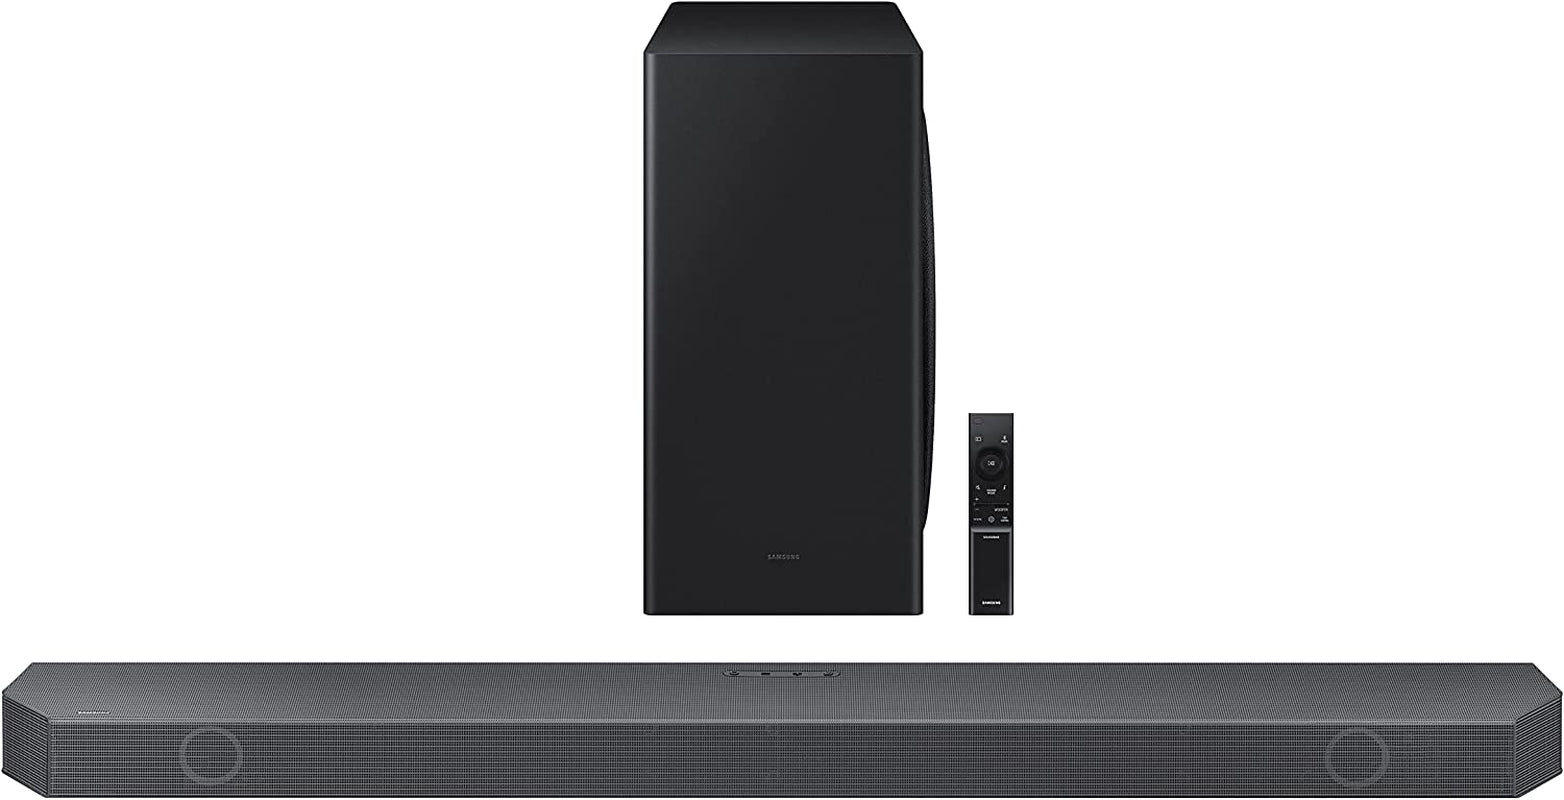 SAMSUNG HW-Q800B/ZA 5.1.2Ch Soundbar W/ Wireless Dolby Atmos, DTS:X, Q Symphony, Spacefit Sound, Built in Voice Assistant, Airplay 2, Game Pro Mode, Tap Sound, 2022